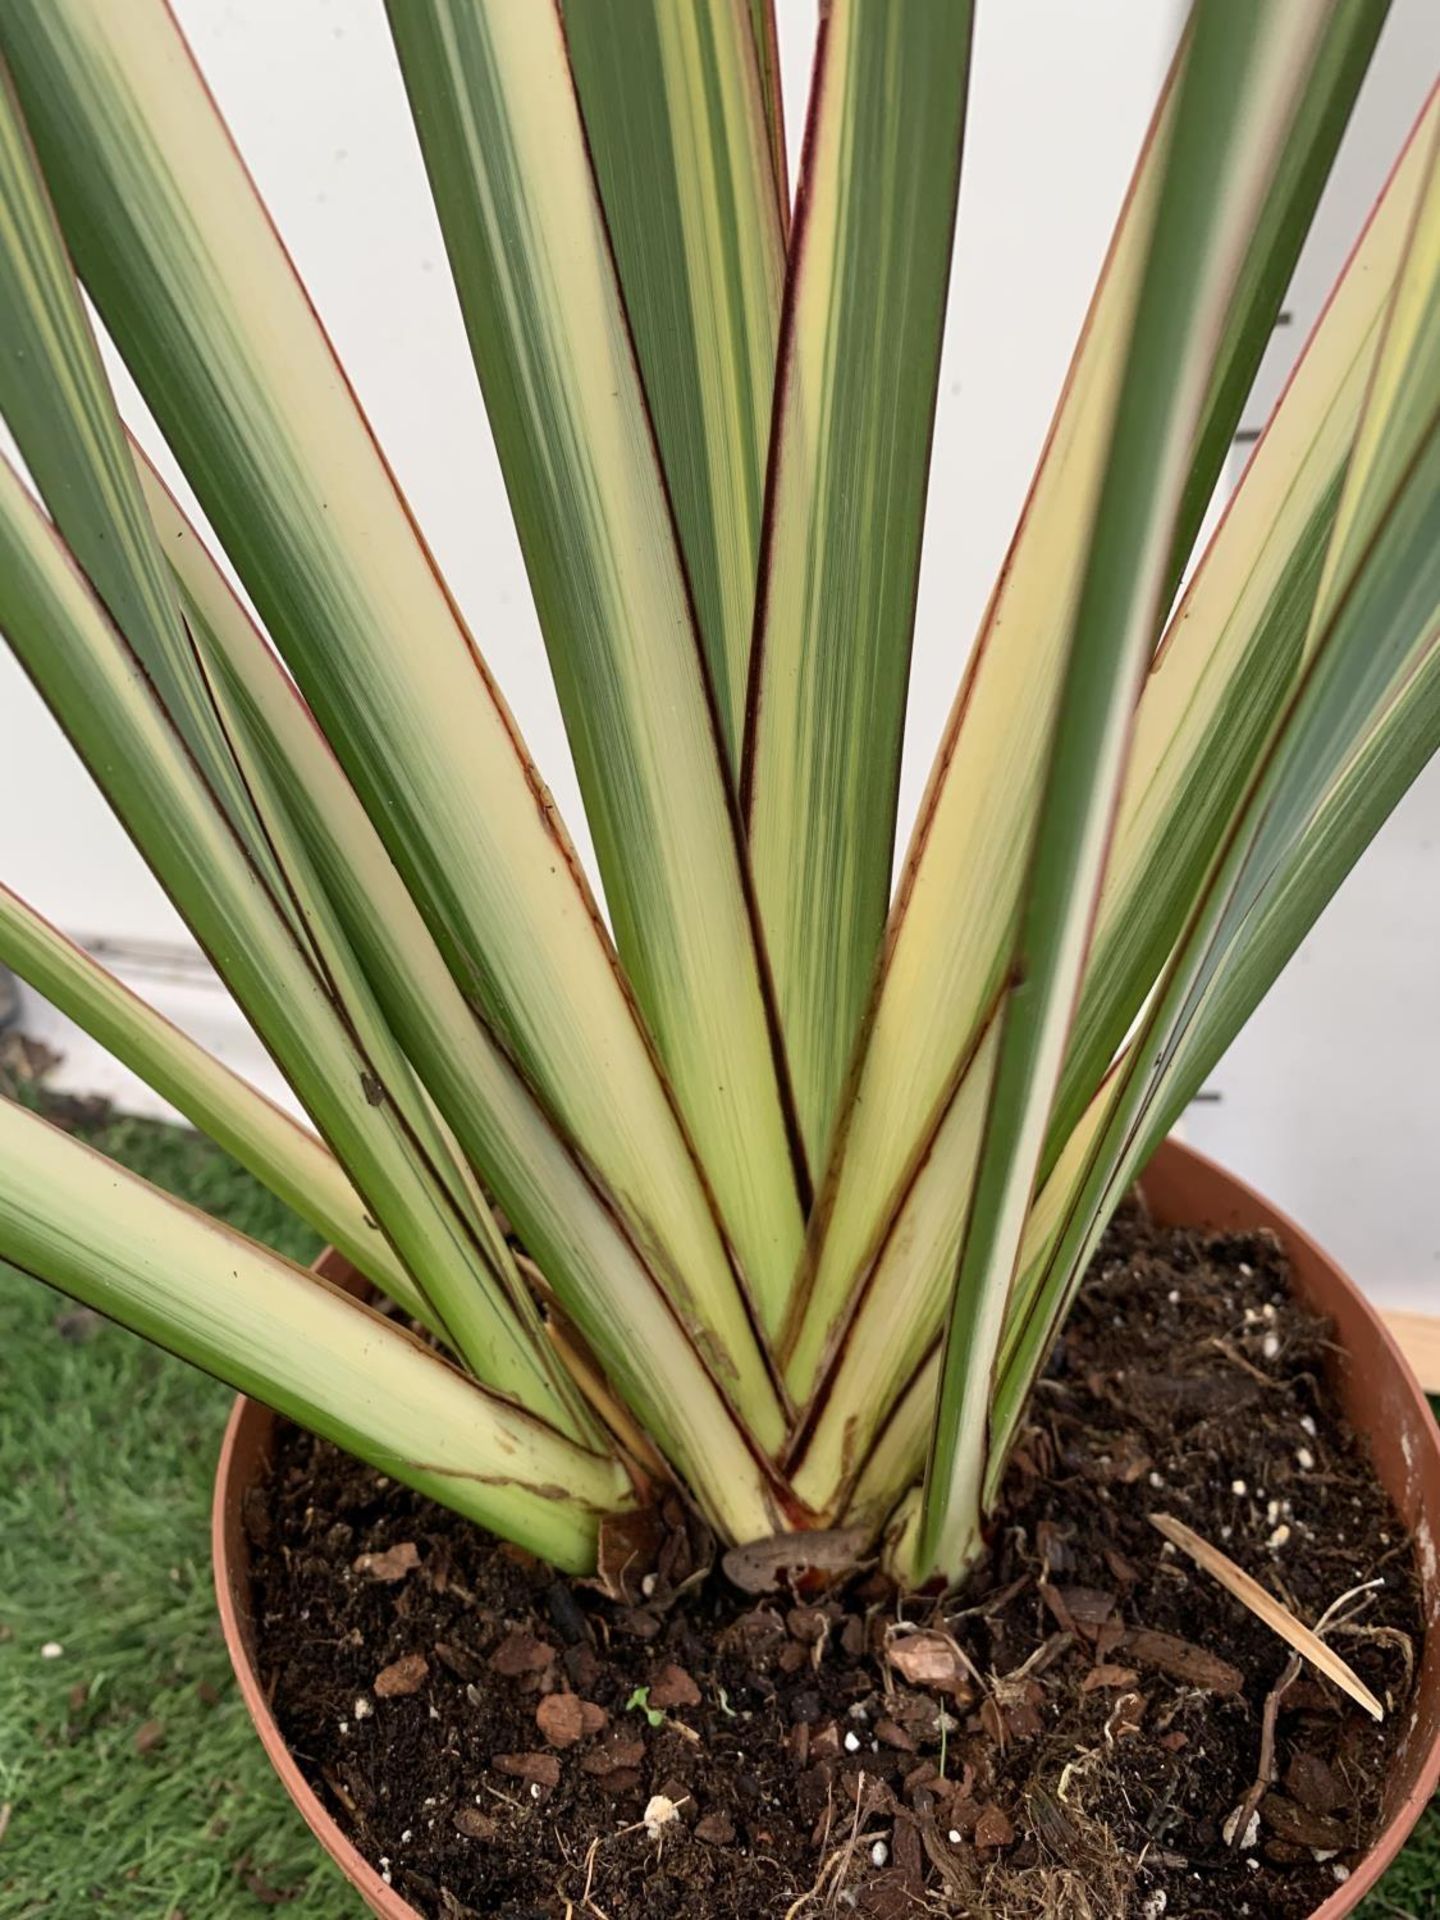 TWO PHORMIUM TENAX PLANTS 'TRICOLOUR' AND 'TENAX' APPROX ONE METRE IN HEIGHT IN 3LTR POTS PLUS VAT - Image 10 of 12